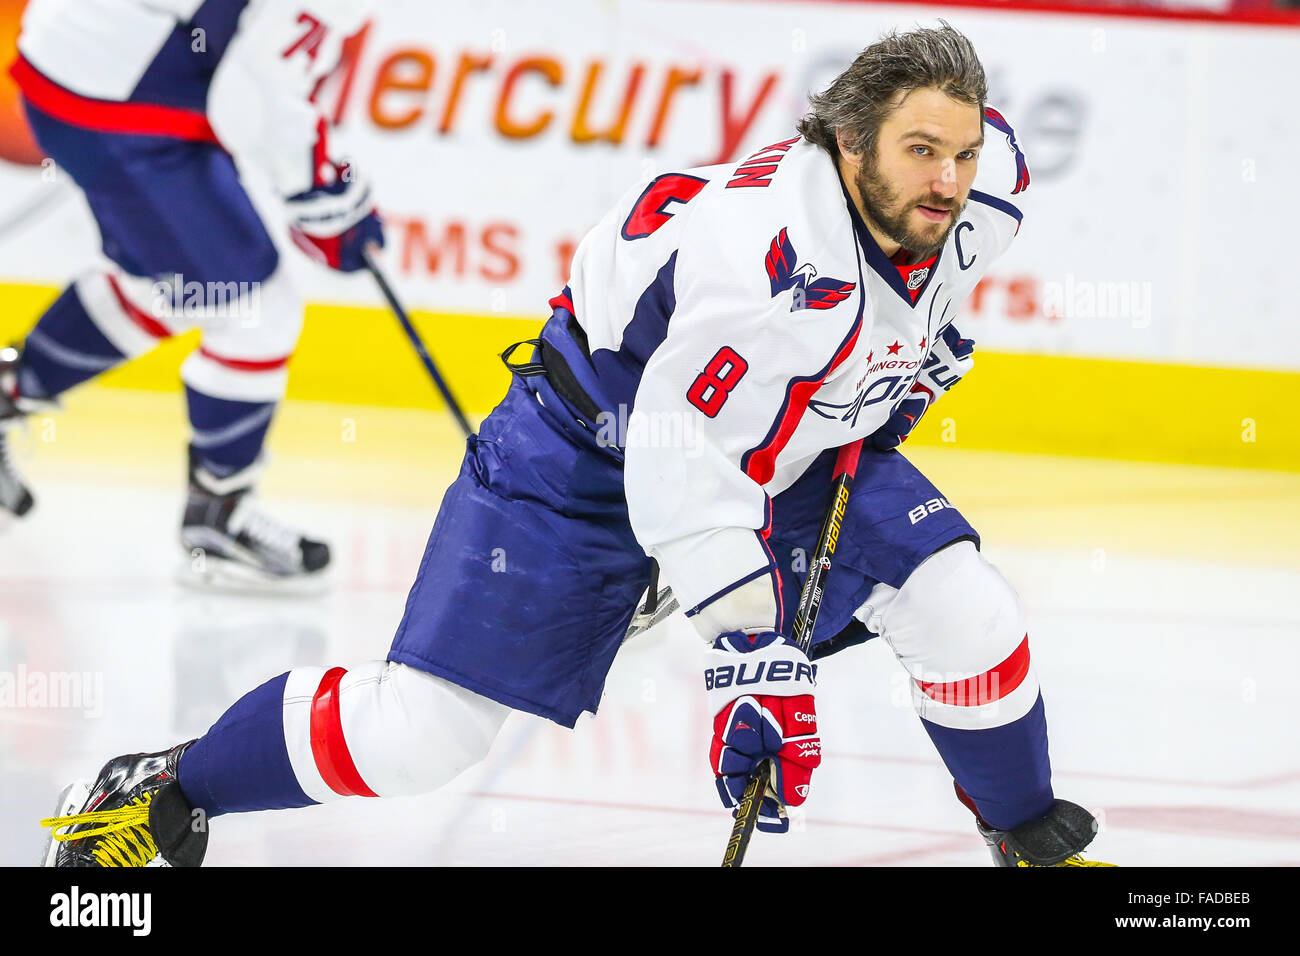 Dec. 21, 2015 - Washington Capitals left wing Alex Ovechkin (8) during the NHL game between the Washington Capitals and the Carolina Hurricanes at the PNC Arena. © Andy Martin Jr./ZUMA Wire/Alamy Live News Stock Photo